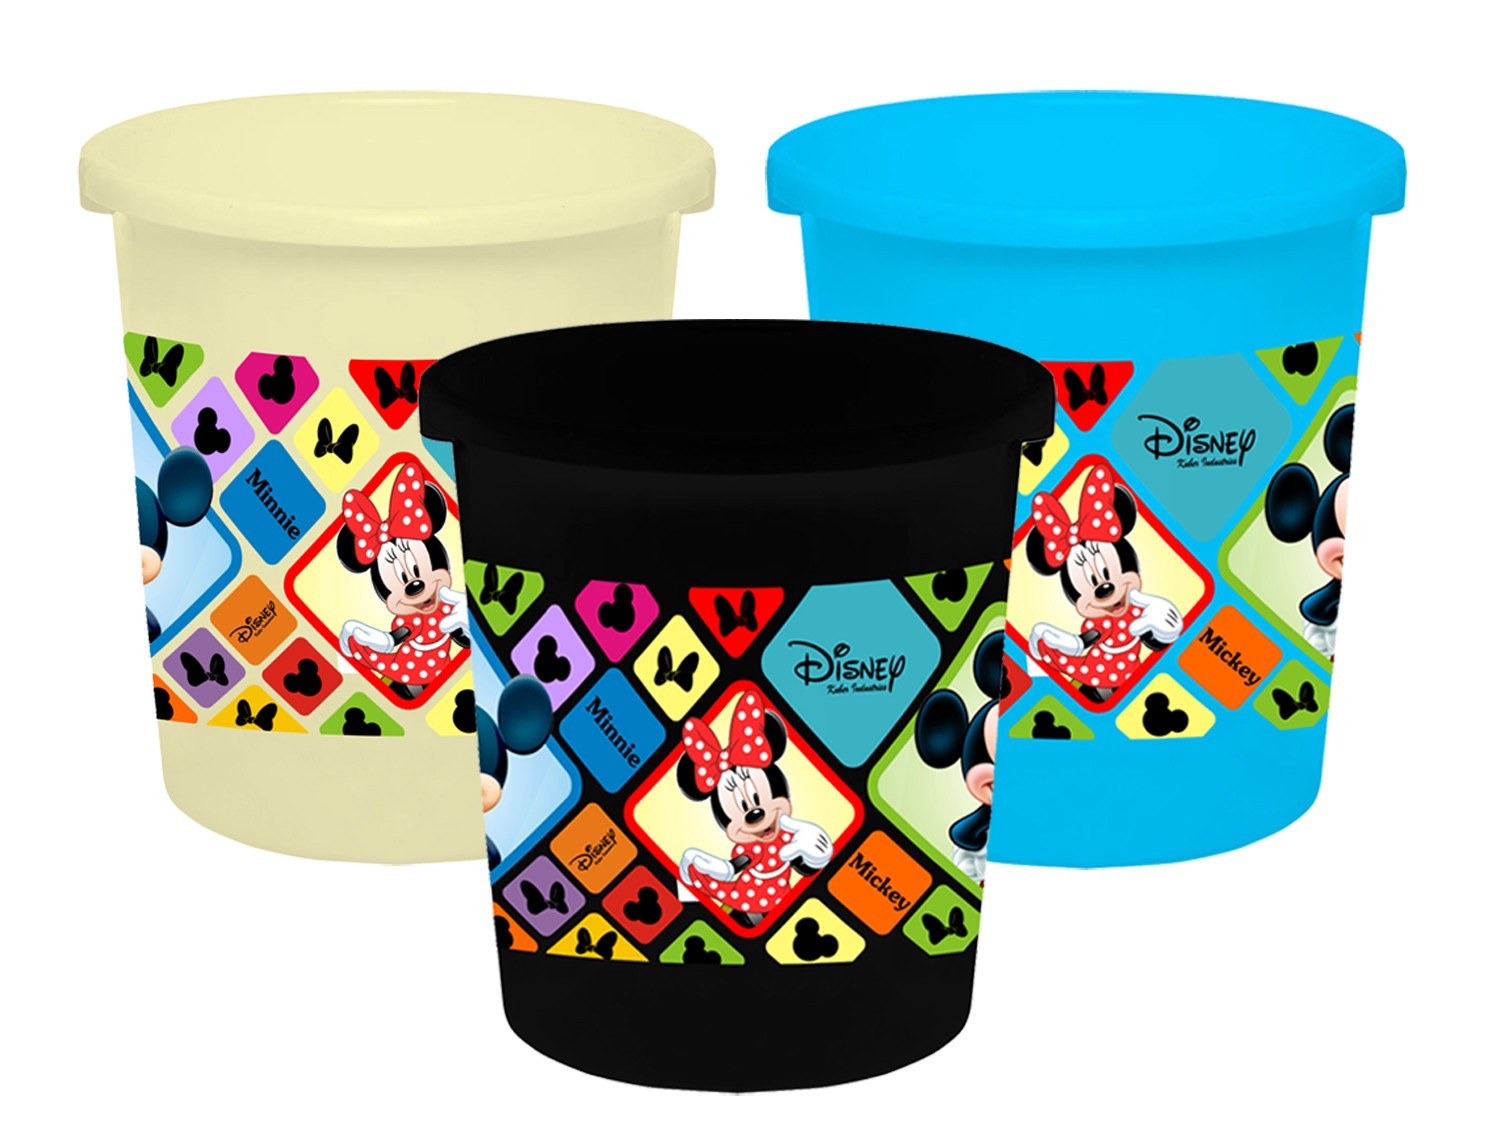 Kuber Industries Disney Mickey Minnie Print Plastic 3 Pieces Garbage Waste Dustbin/Recycling Bin for Home, Office, Factory, 5 Liters (Cream & Blue & Black) -HS_35_KUBMART17811